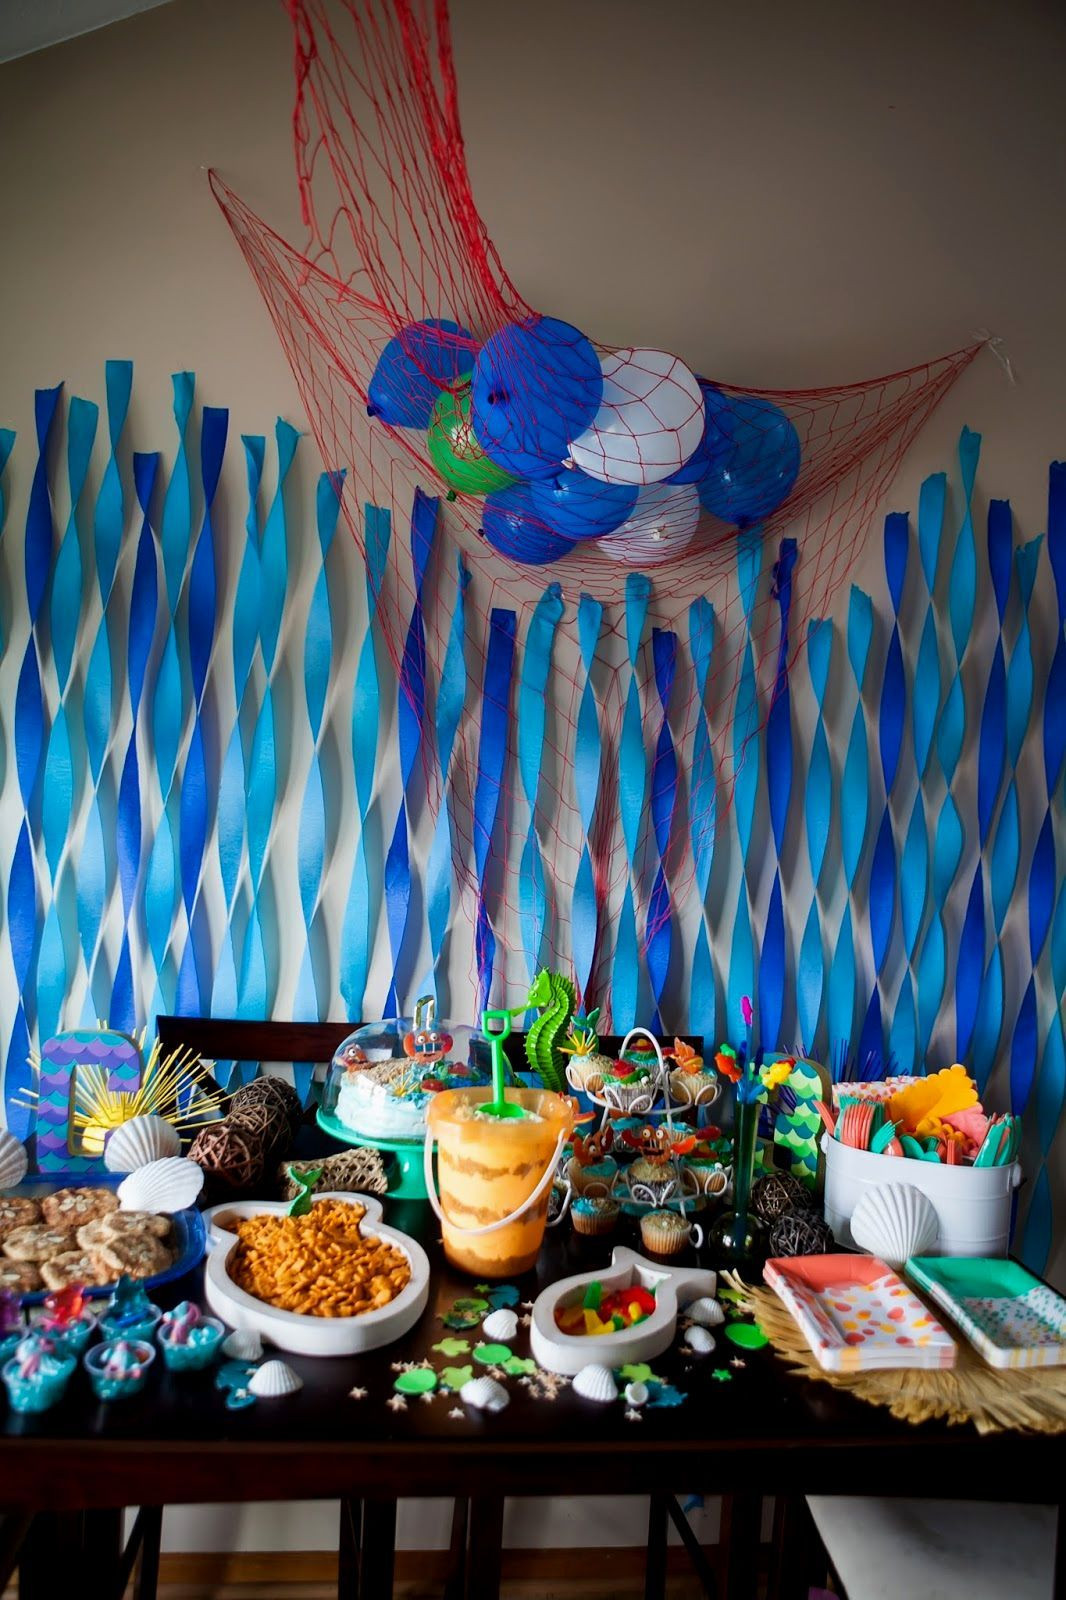 Centerpiece Ideas For Beach Theme Party
 Pin by Aero FIT4U on Beach Party decorations in 2018